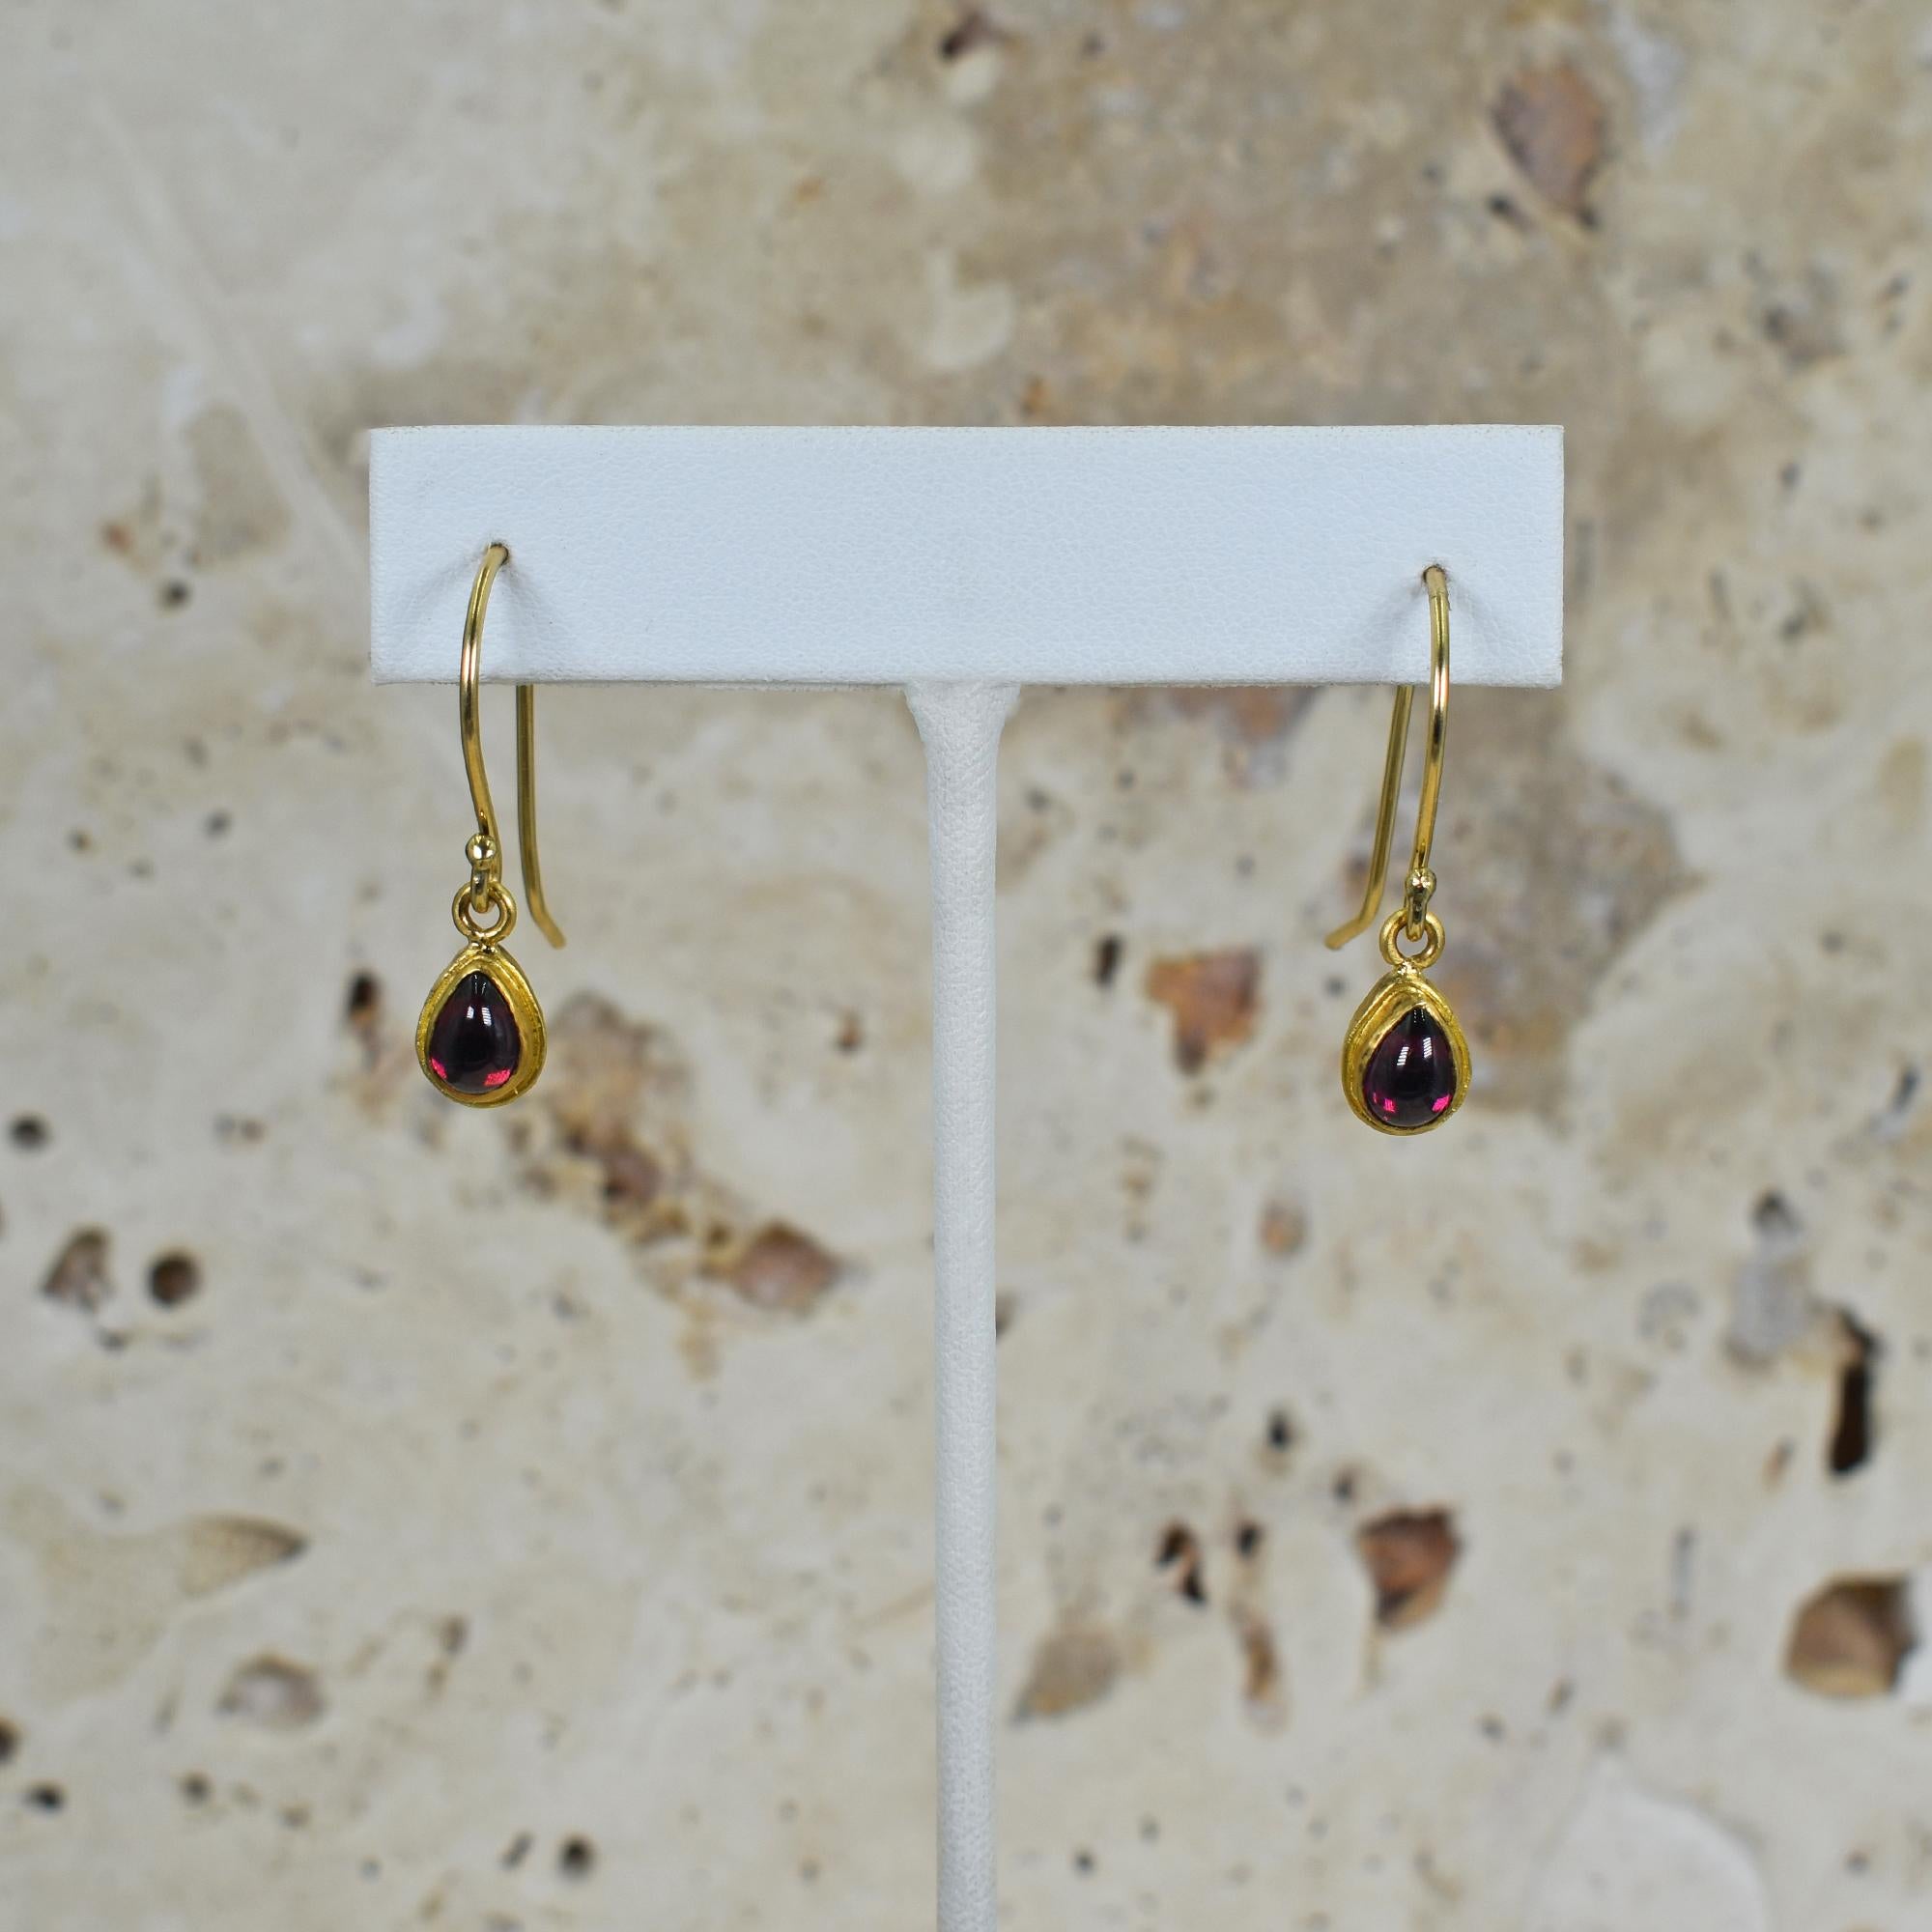 1.02 total carat red Rubellite Tourmaline tear drop / pear-shaped cabochon gemstones in 18k yellow gold bezel dangle earrings. Dangle earrings measure 1.07 inches in length. Contemporary, lightweight style of these earrings combined with the rich